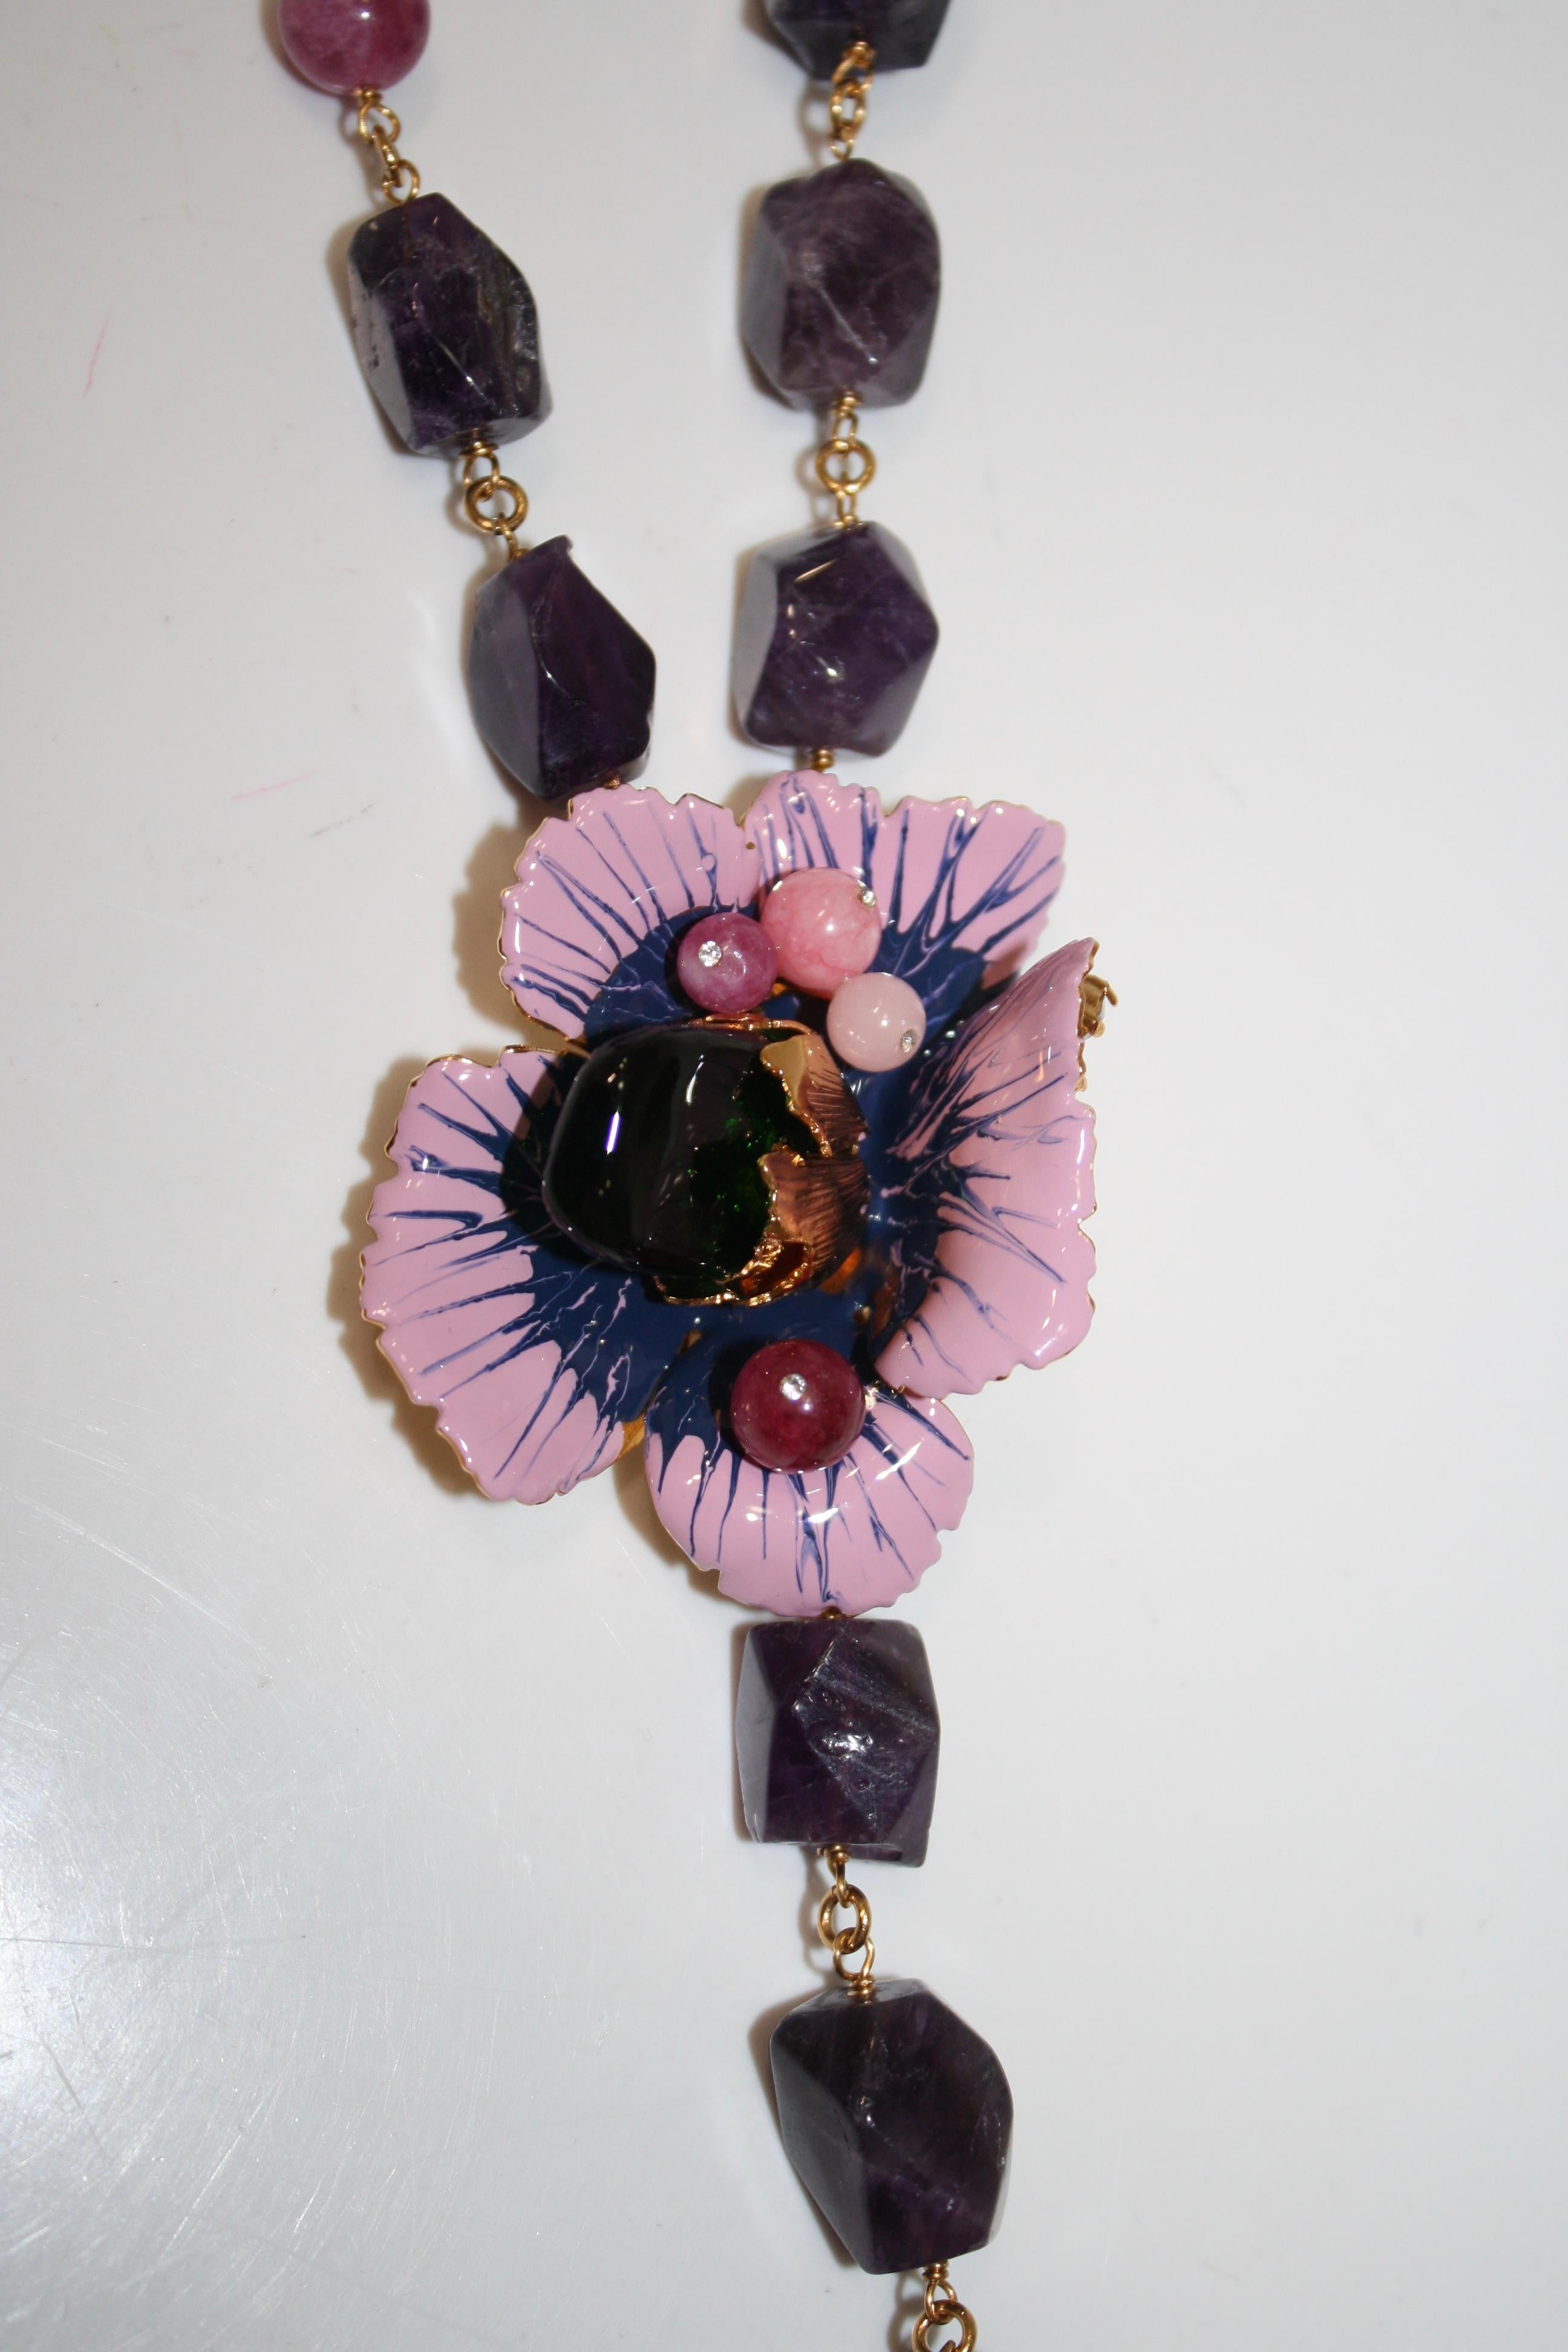 Necklace made with Amethyst. Enameled flower encrusted with pink quartz and crystal, pate de verre . Copper dipped in 24 carat gold.
Made in France